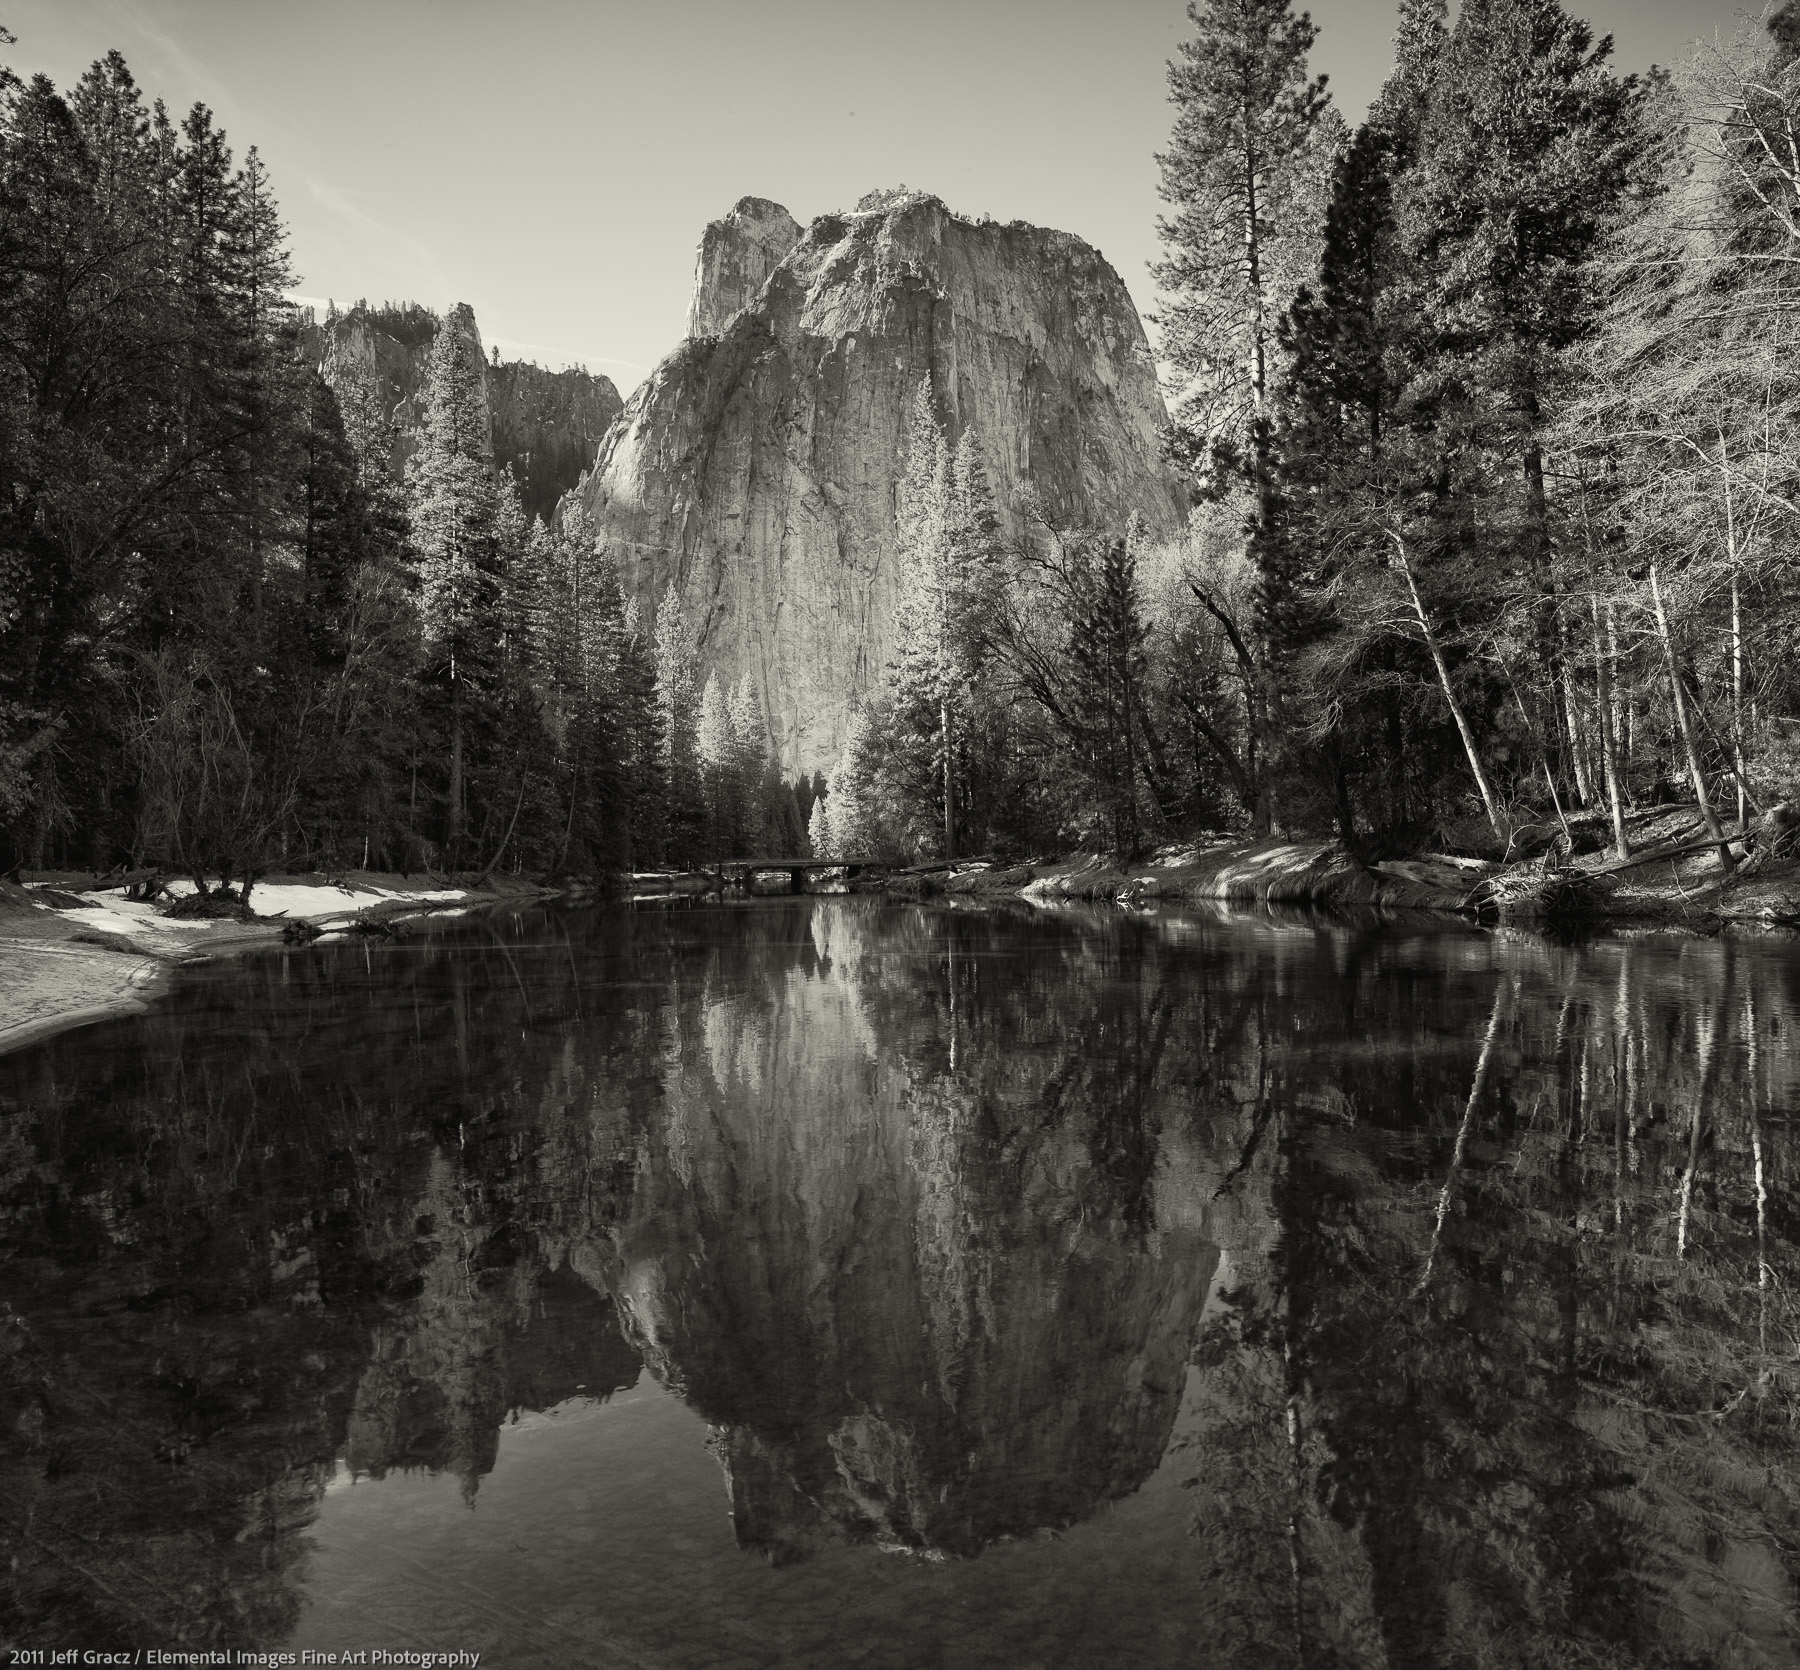 Catherdral Rocks and Merced River | Yosemite National Park | CA | USA - © 2011 Jeff Gracz / Elemental Images Fine Art Photography - All Rights Reserved Worldwide